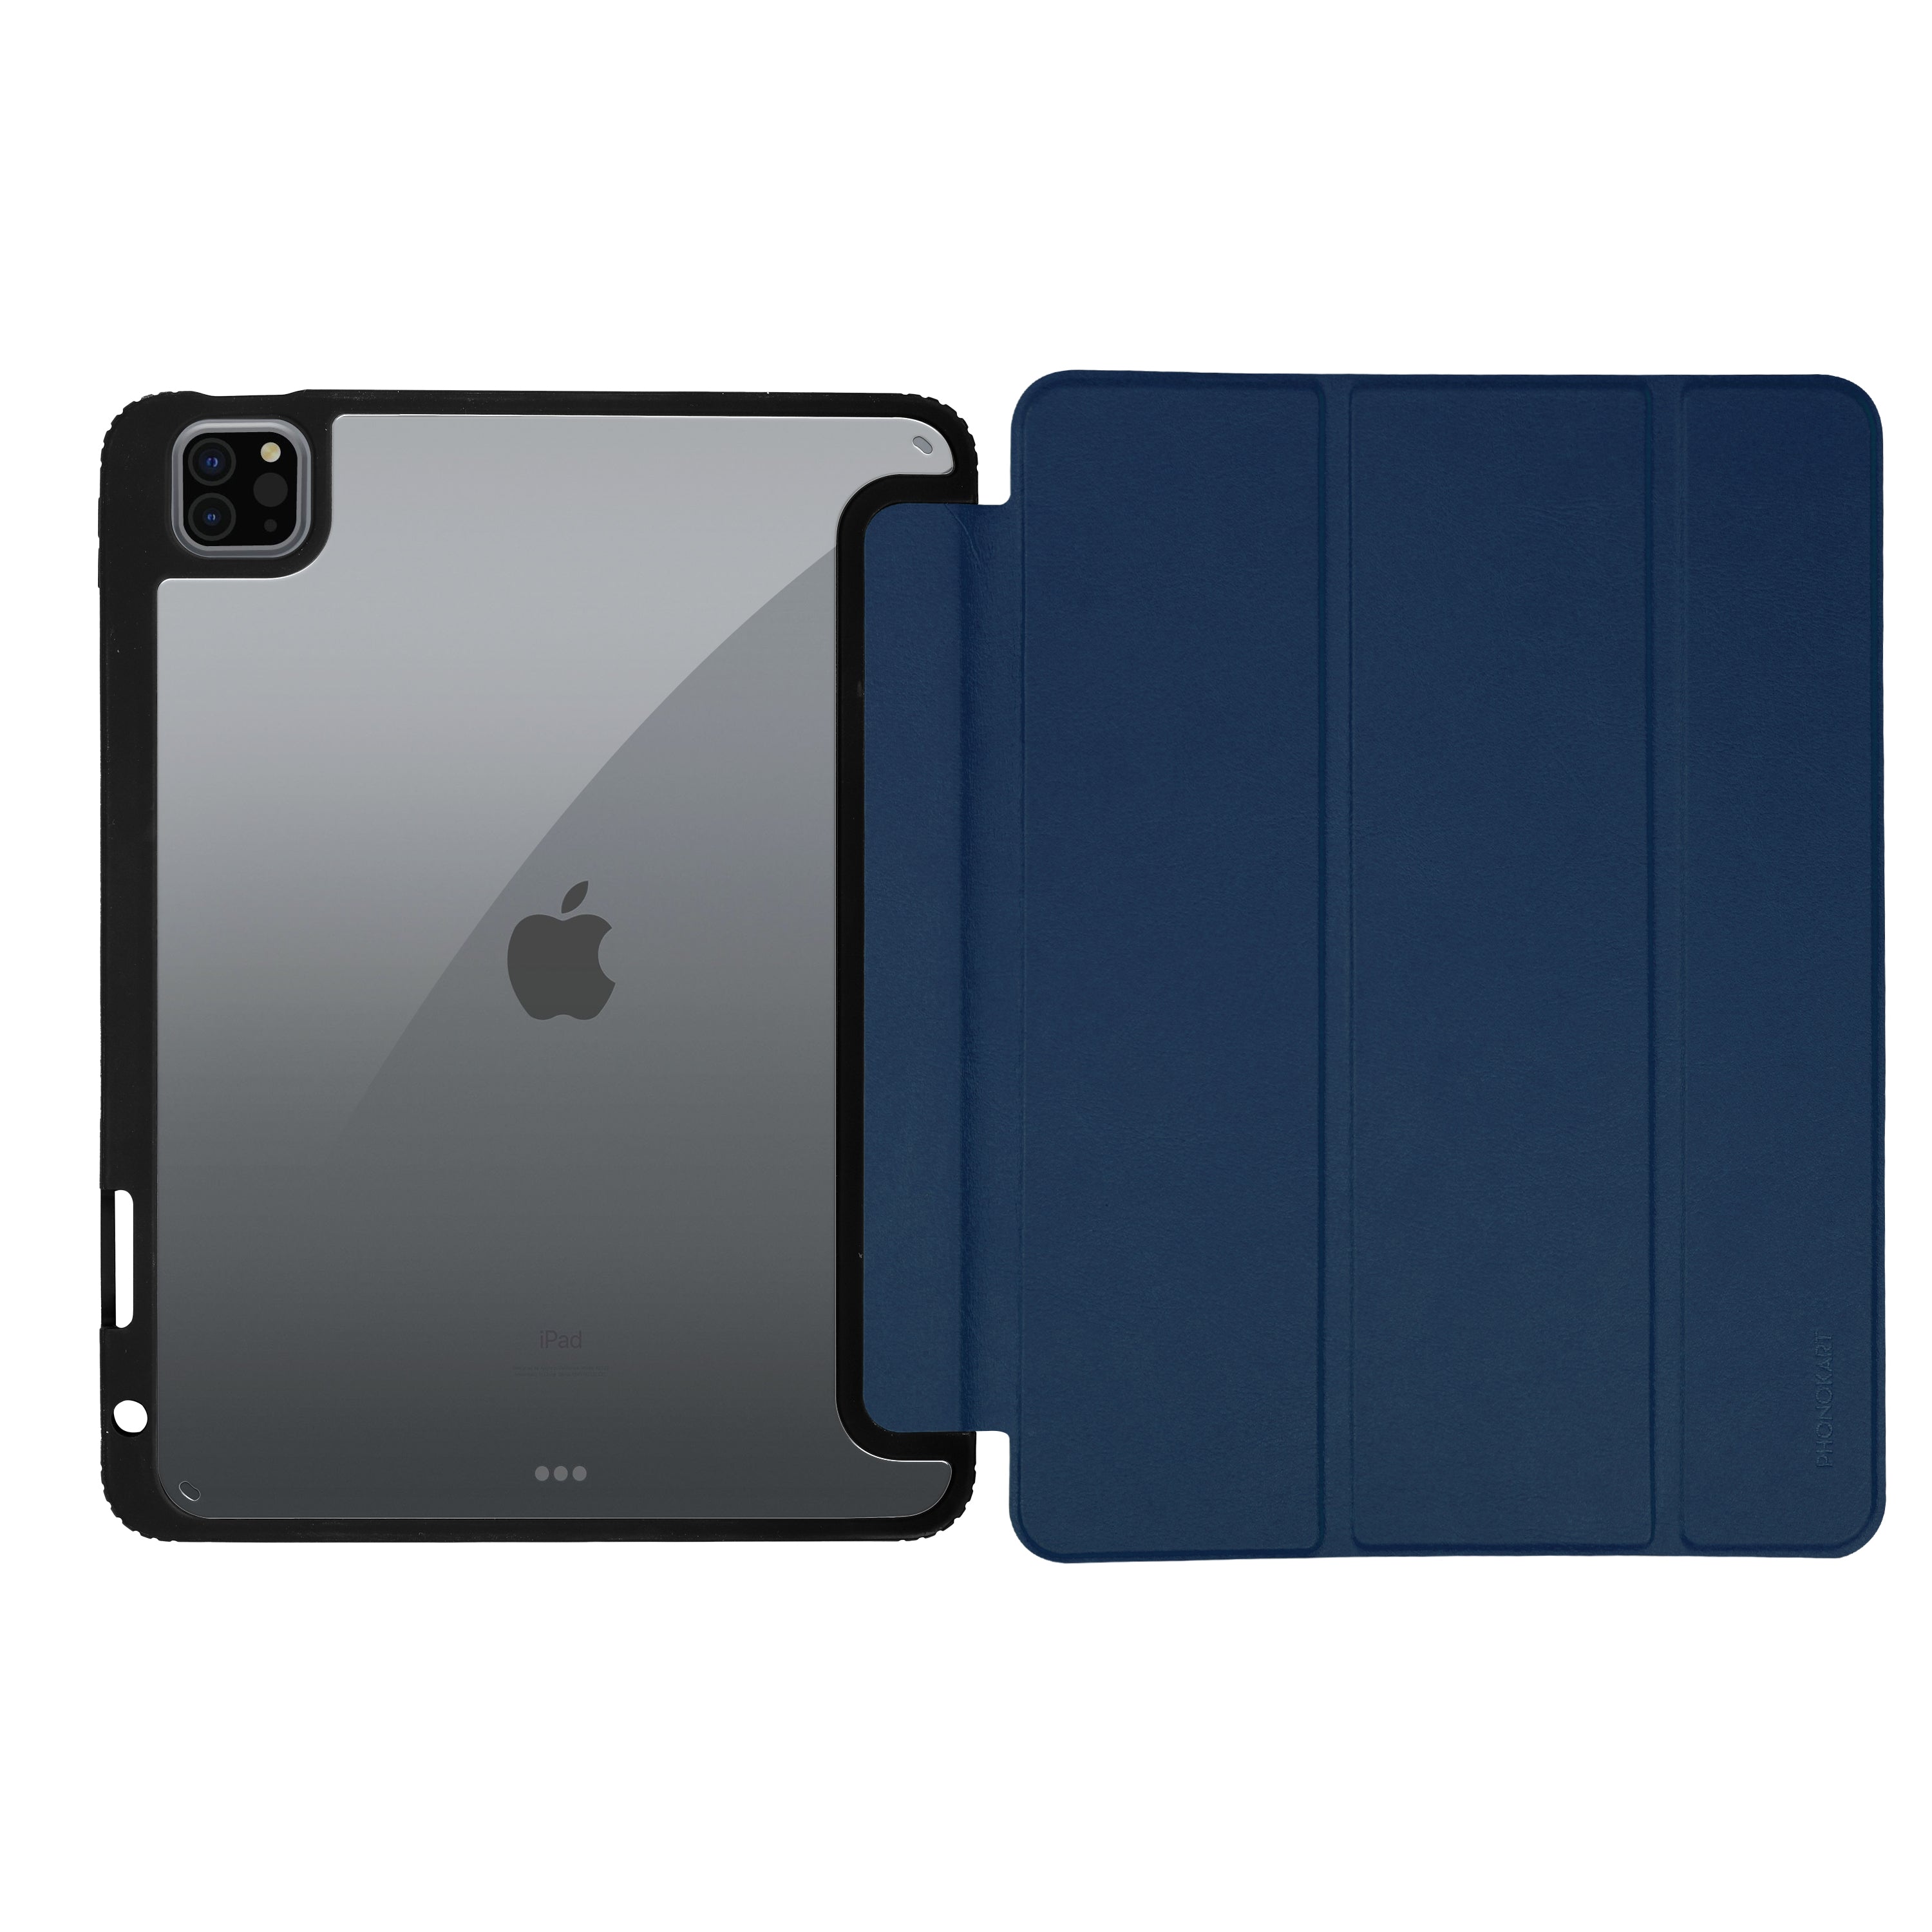 ARMOR FLIP CASE FOR IPAD 12.9 INCH WITH PENCIL HOLDER (I Pad Pro 1,2,3,4,5,6th Gen)